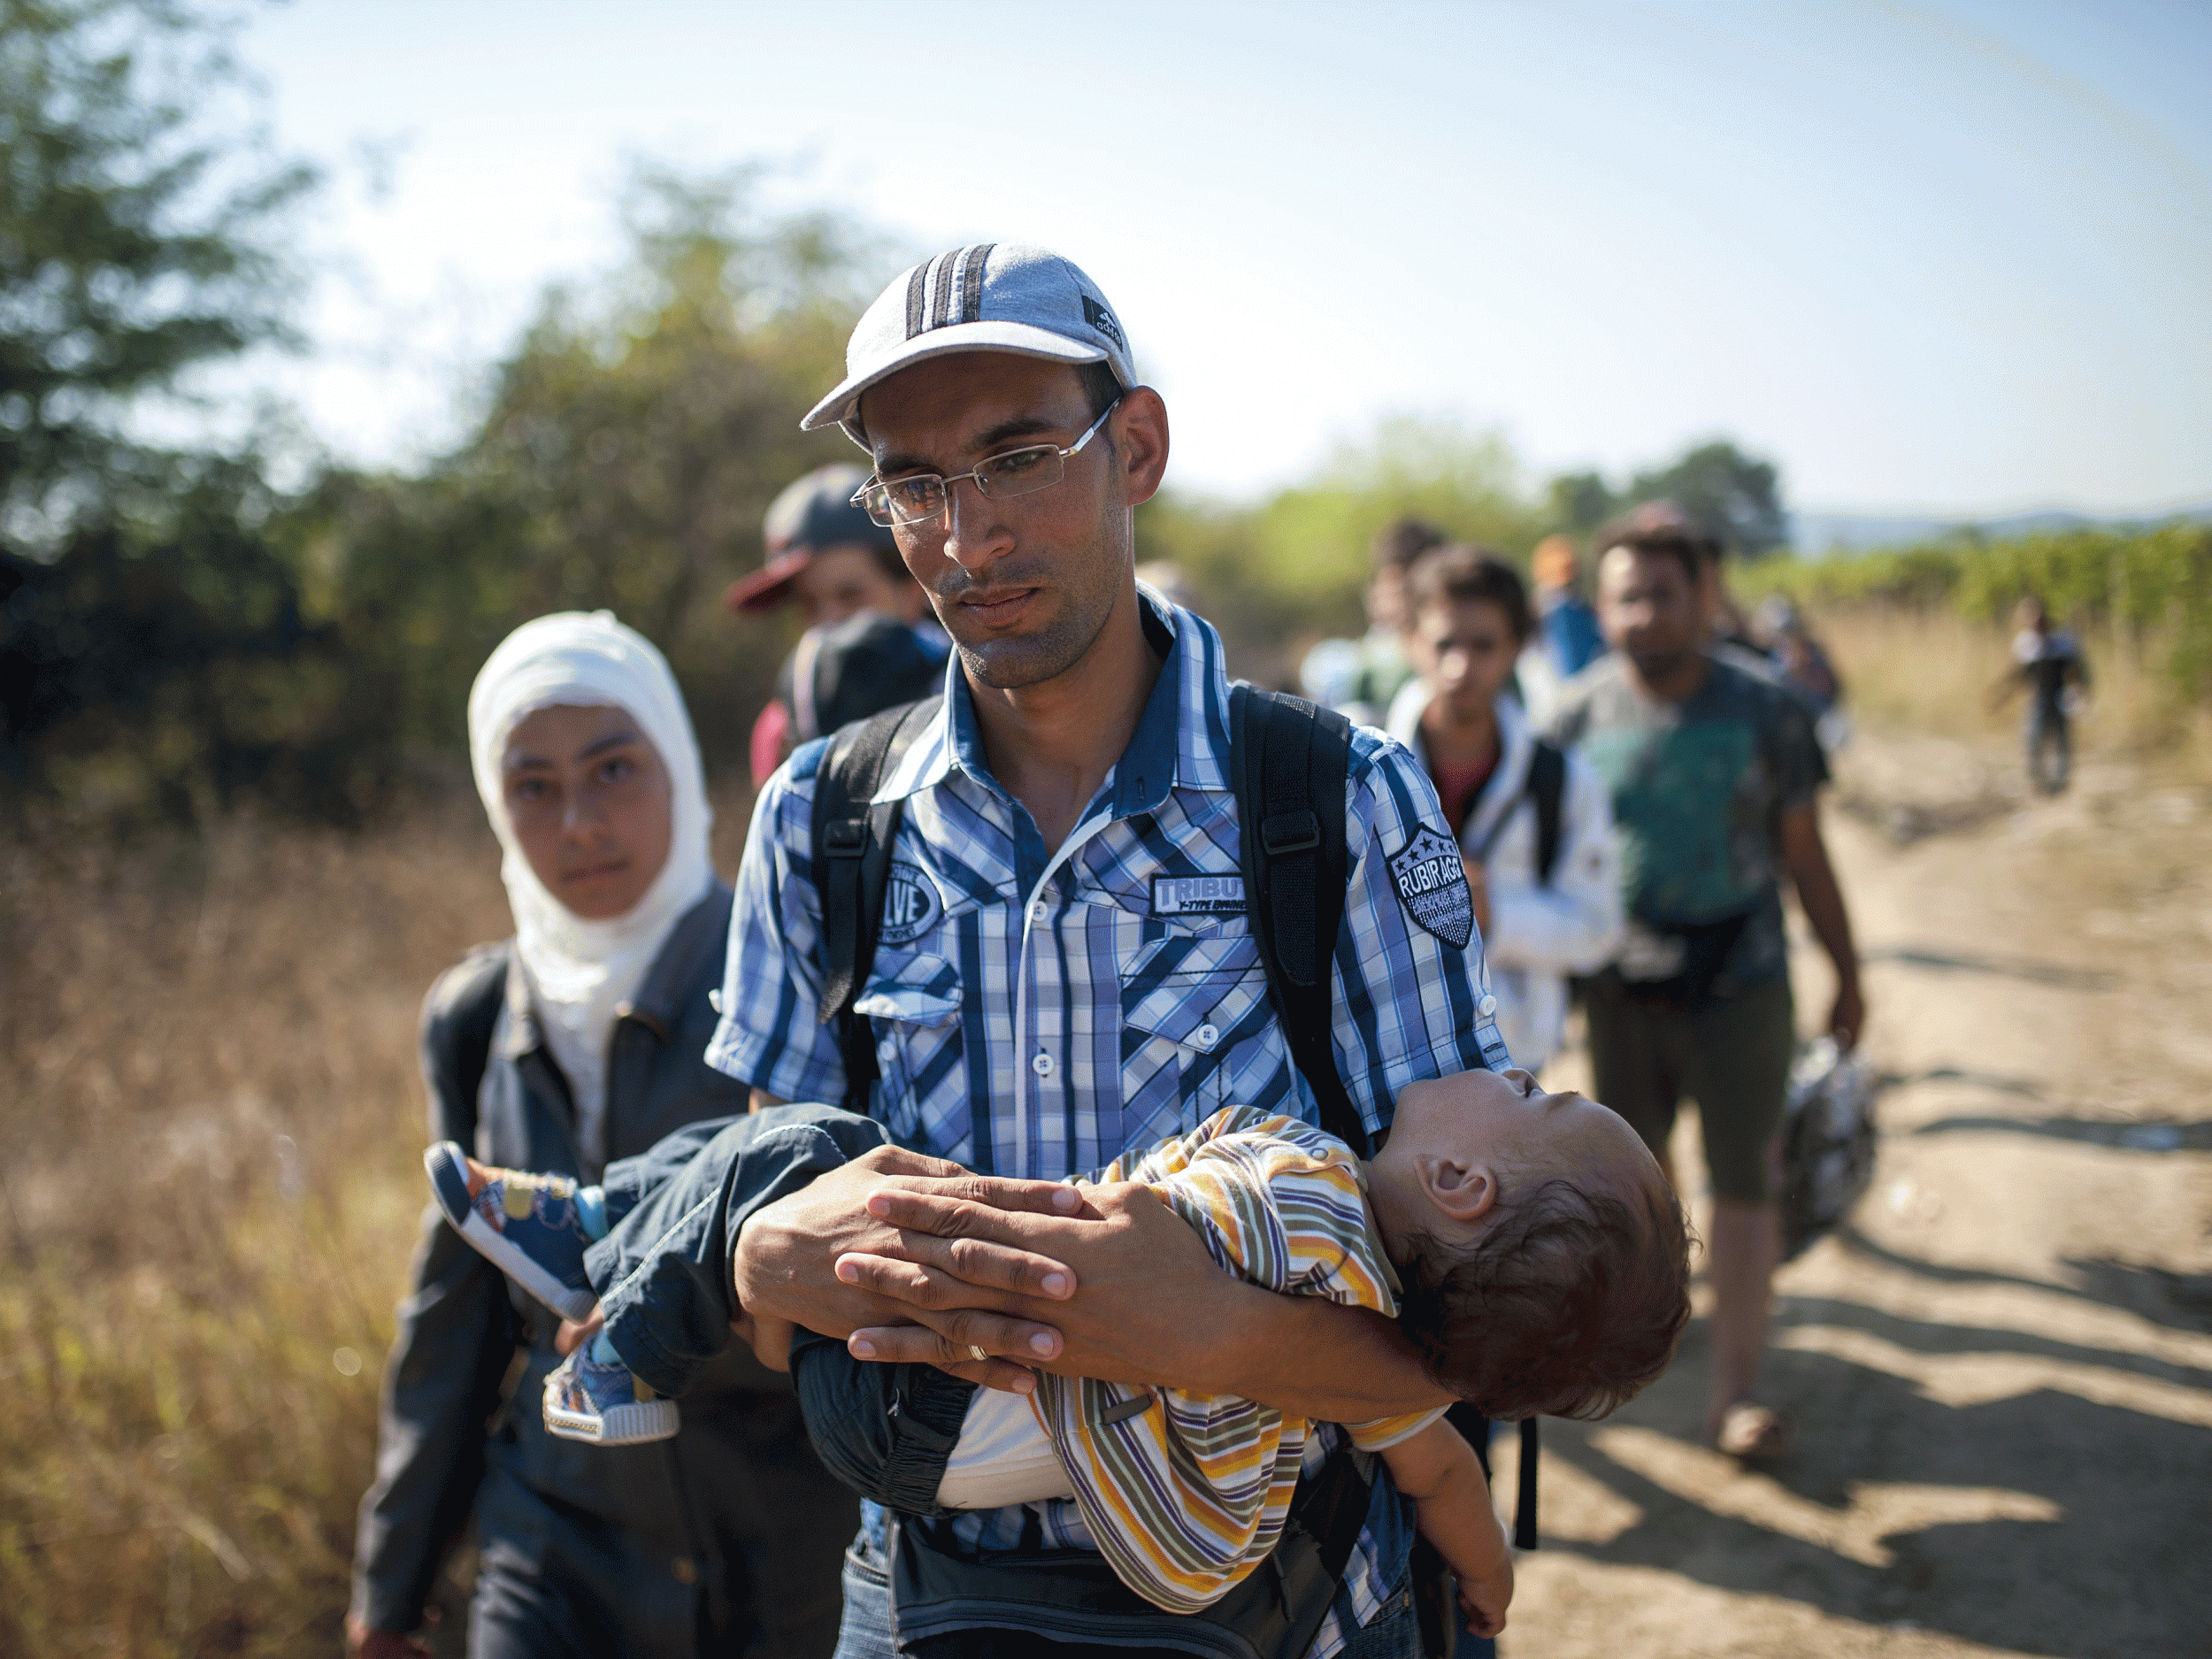 Many refugees are carrying children in their arms for miles as they make their journey to Europe